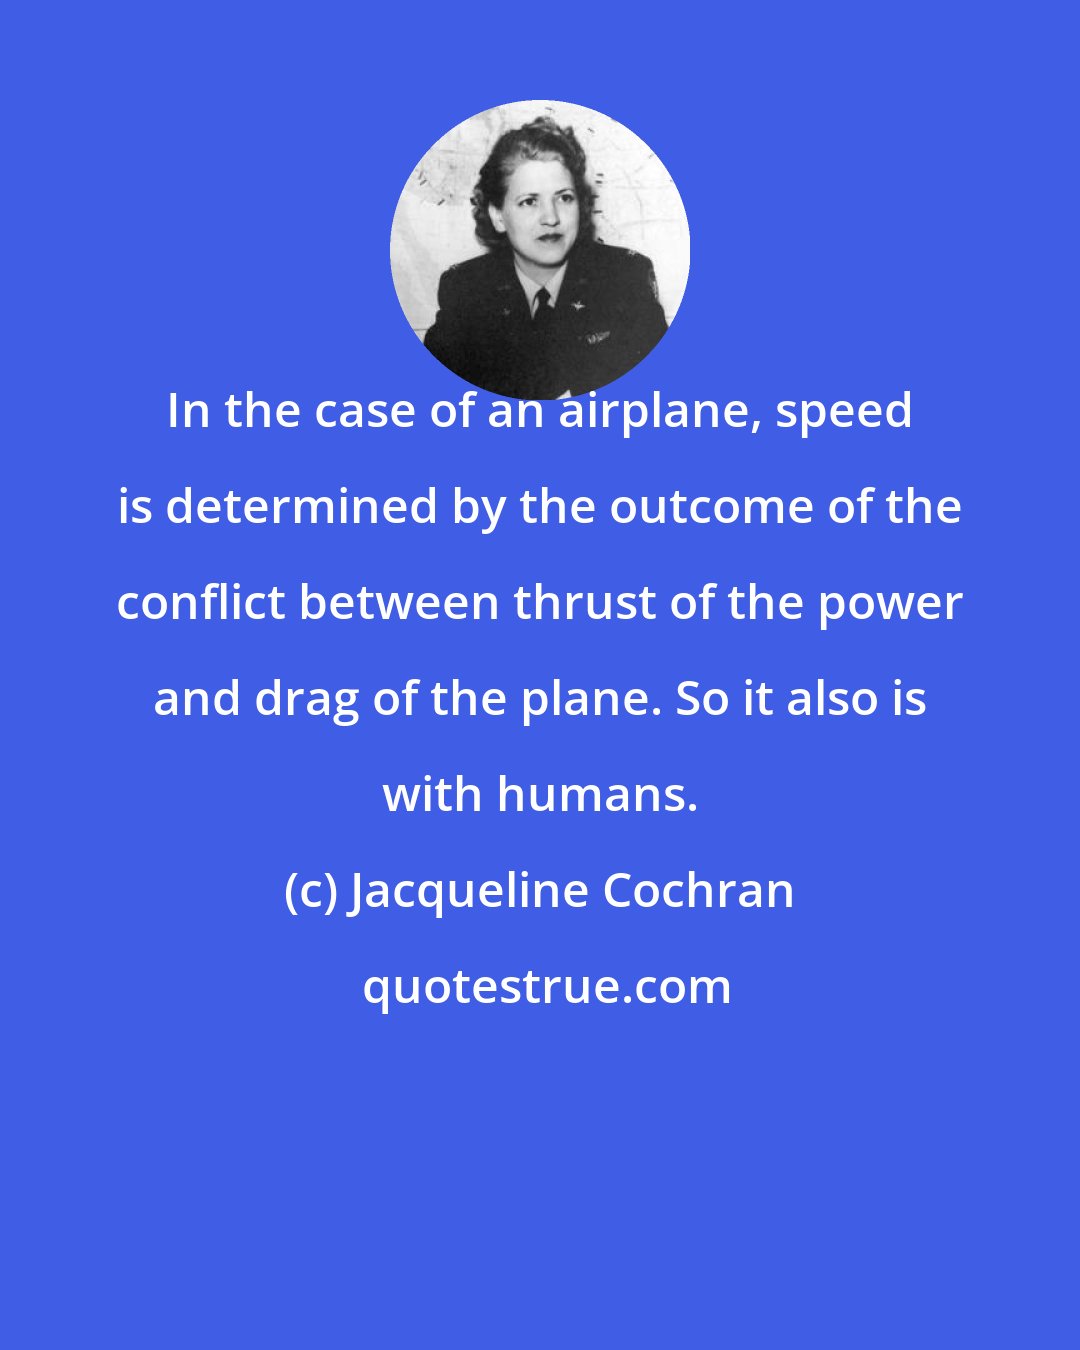 Jacqueline Cochran: In the case of an airplane, speed is determined by the outcome of the conflict between thrust of the power and drag of the plane. So it also is with humans.